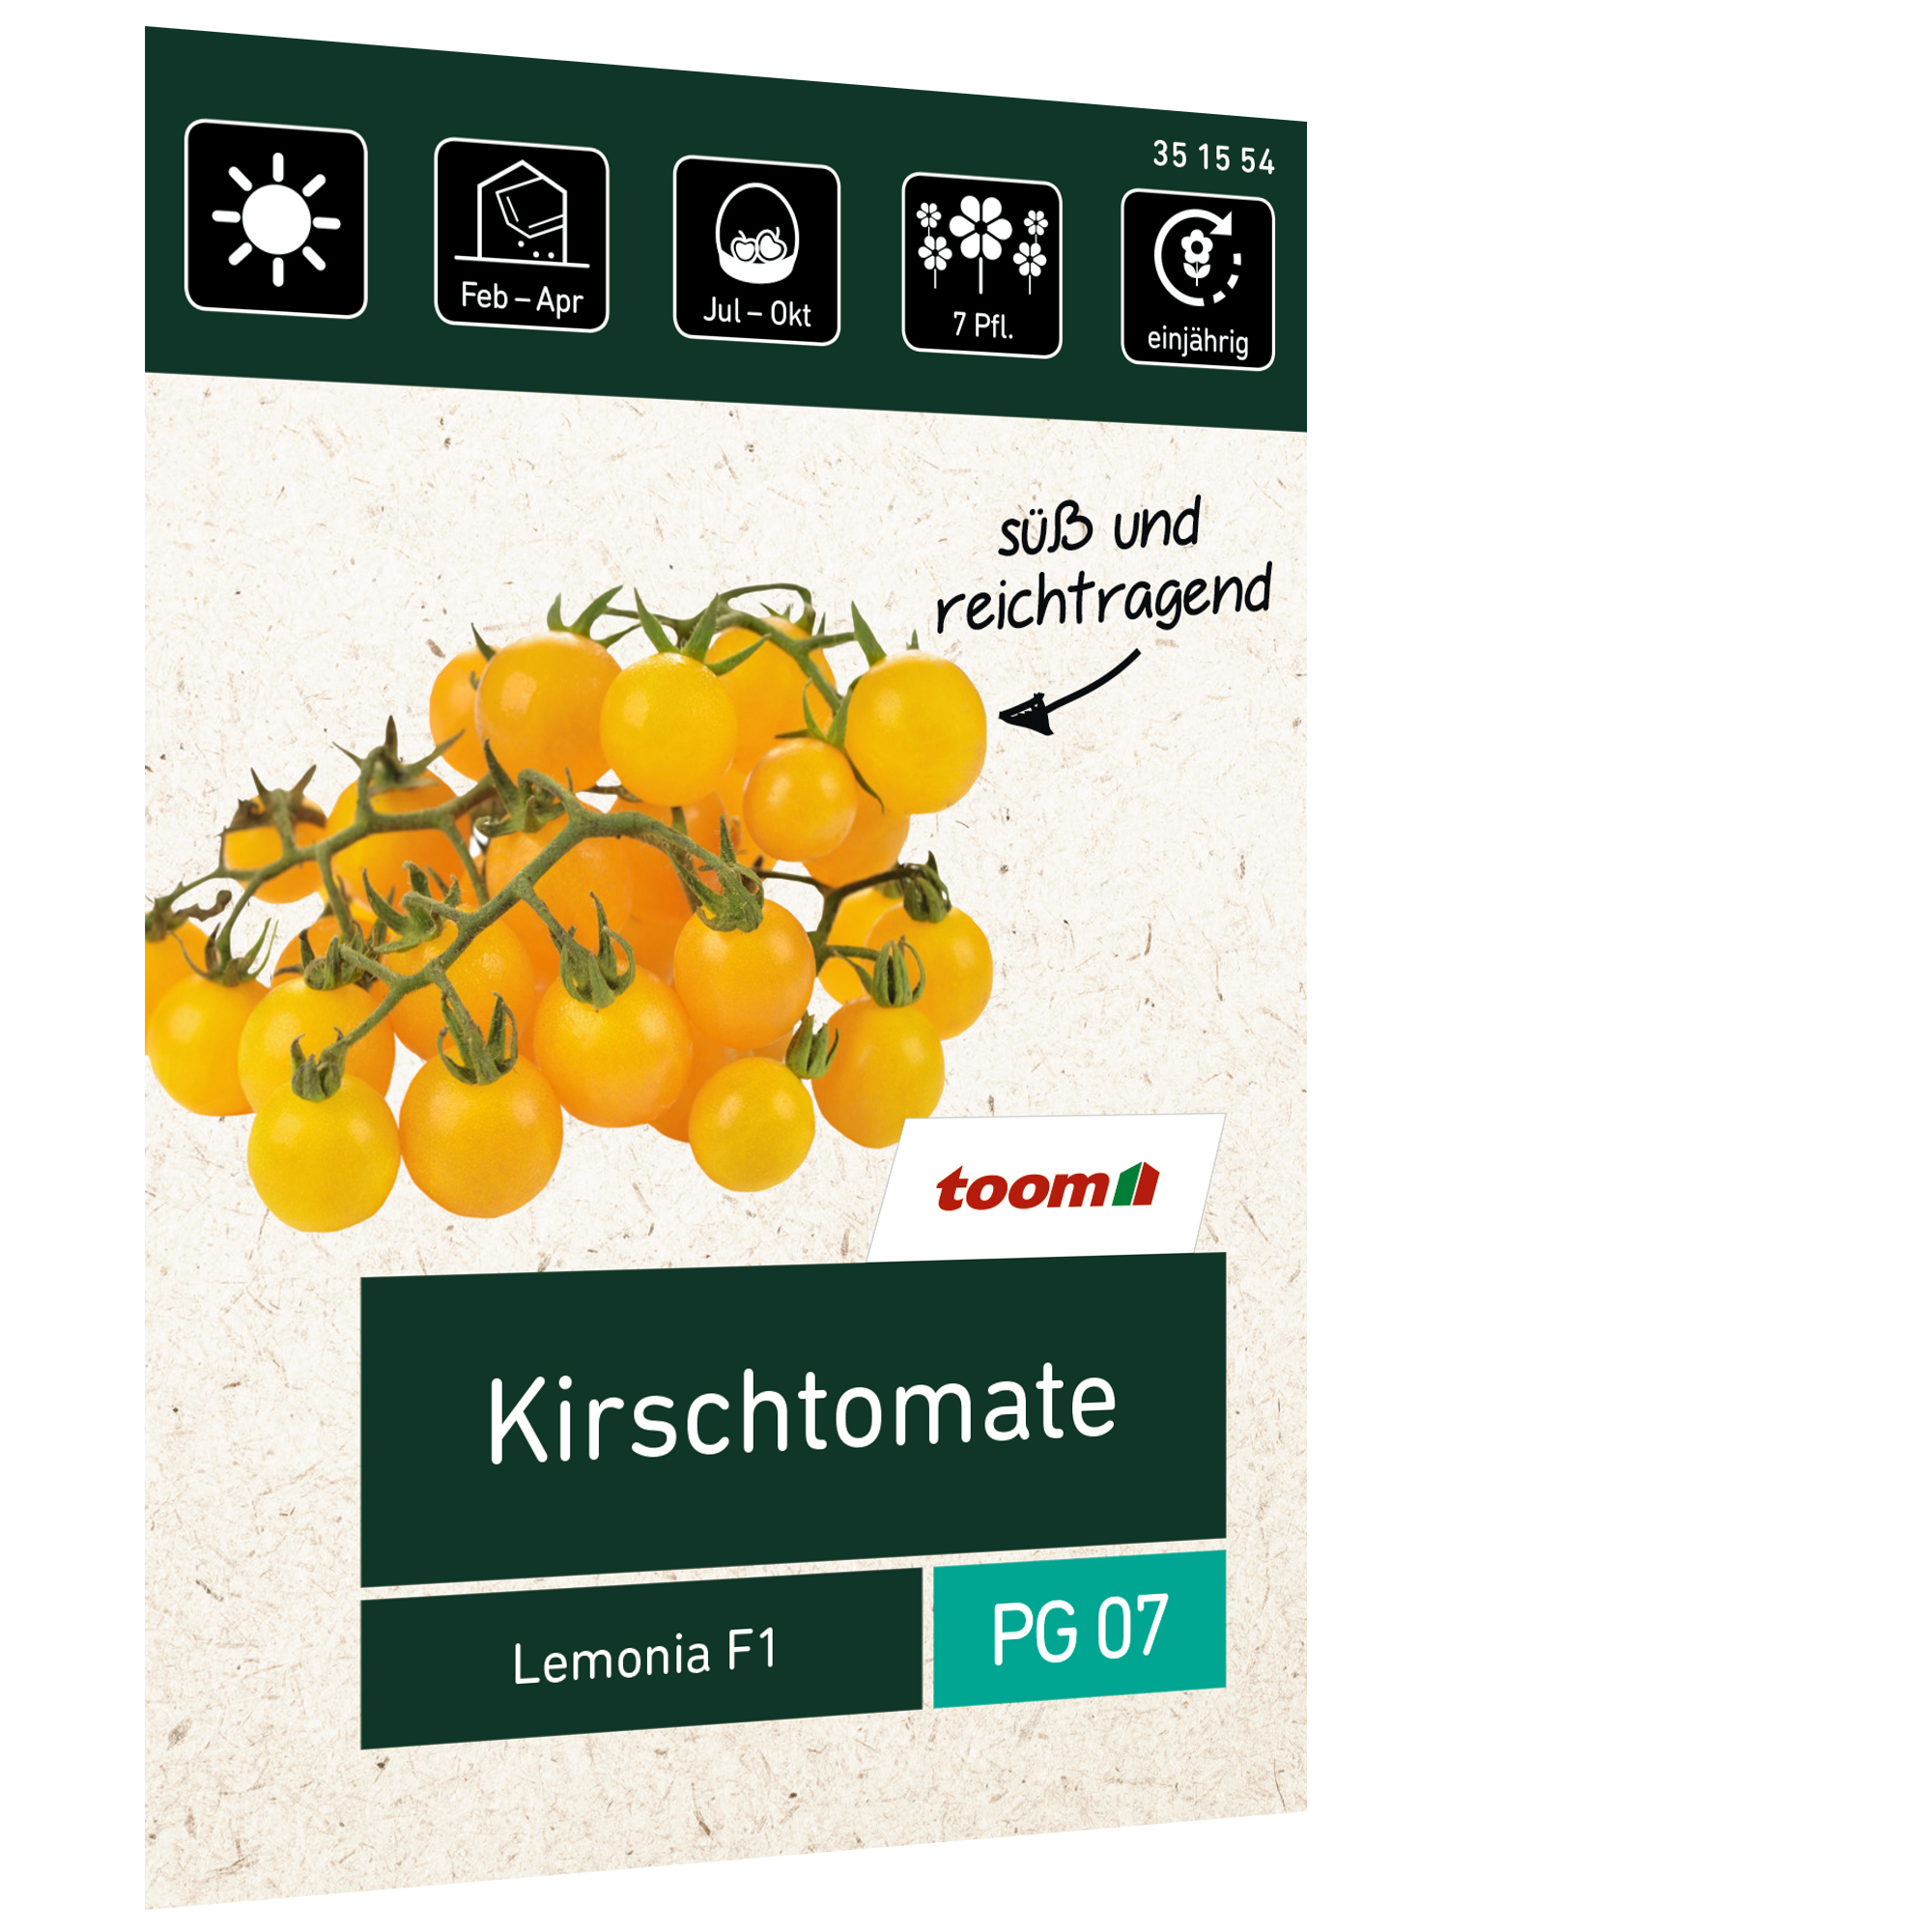 Kirschtomate 'Lemonia F1' + product picture